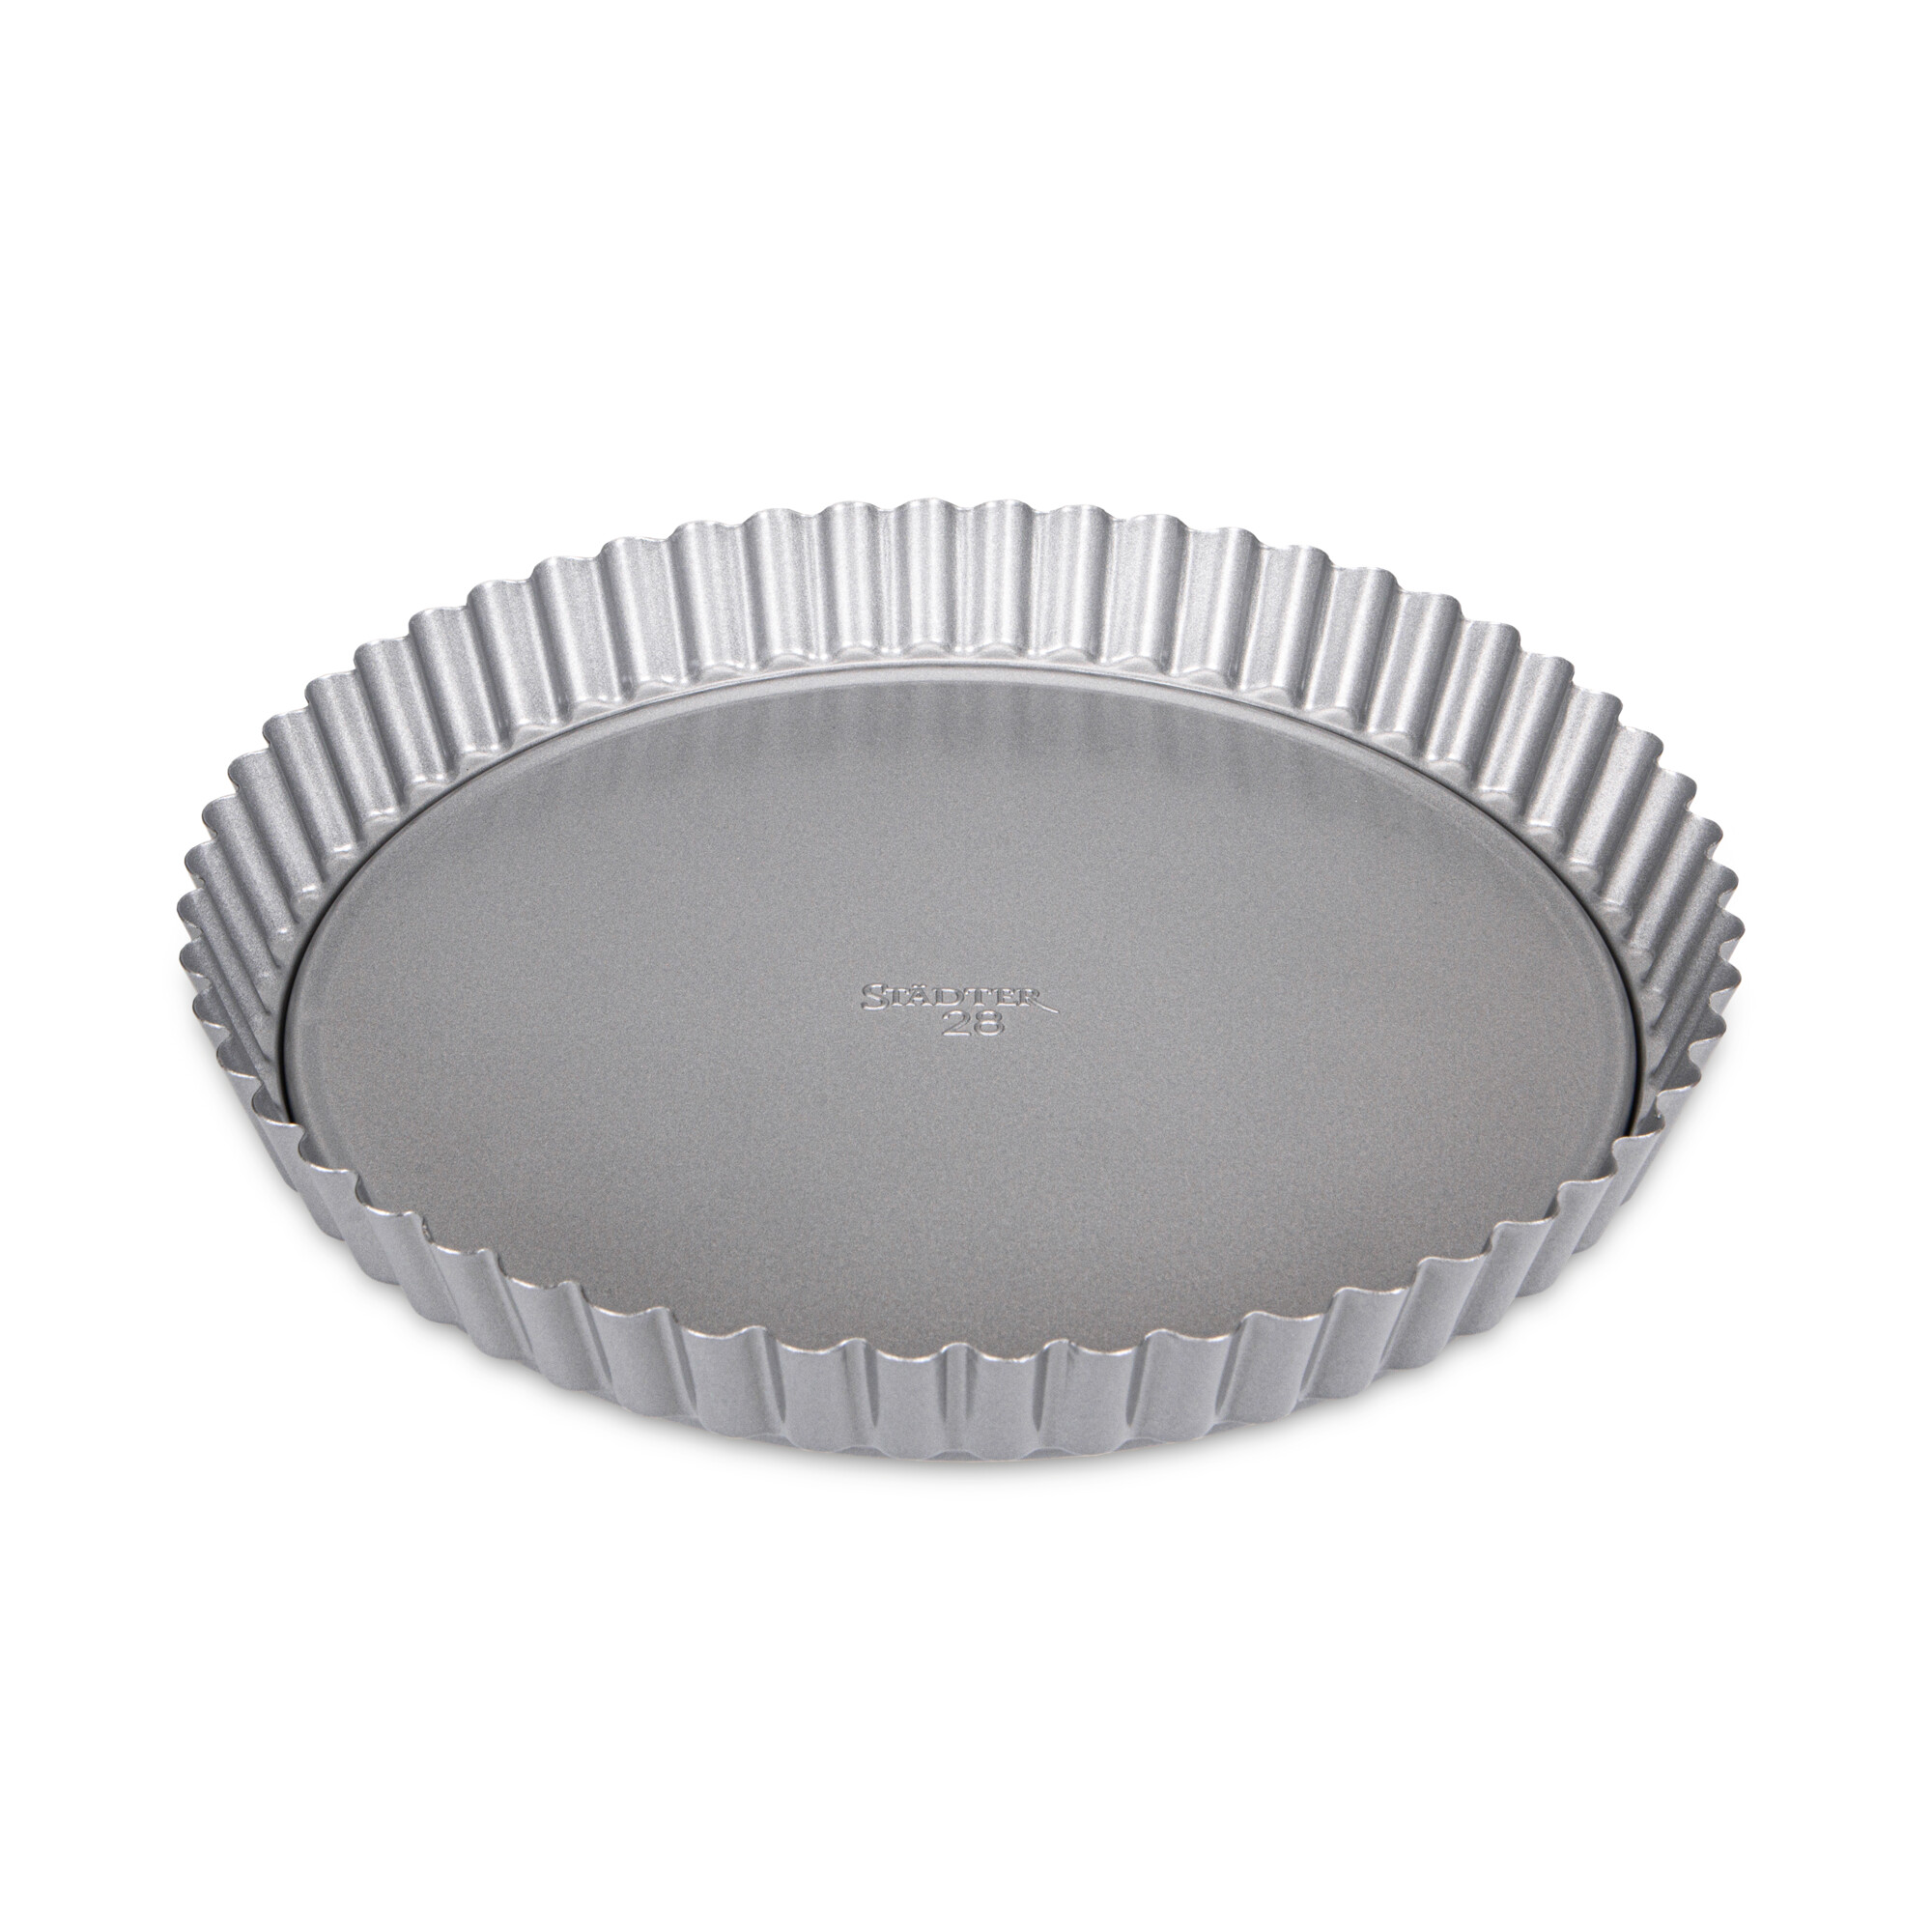 4 Sizes New Pie Cake Tart Removable Non Stick Bottom Baking Pastry Mold Pan WB 